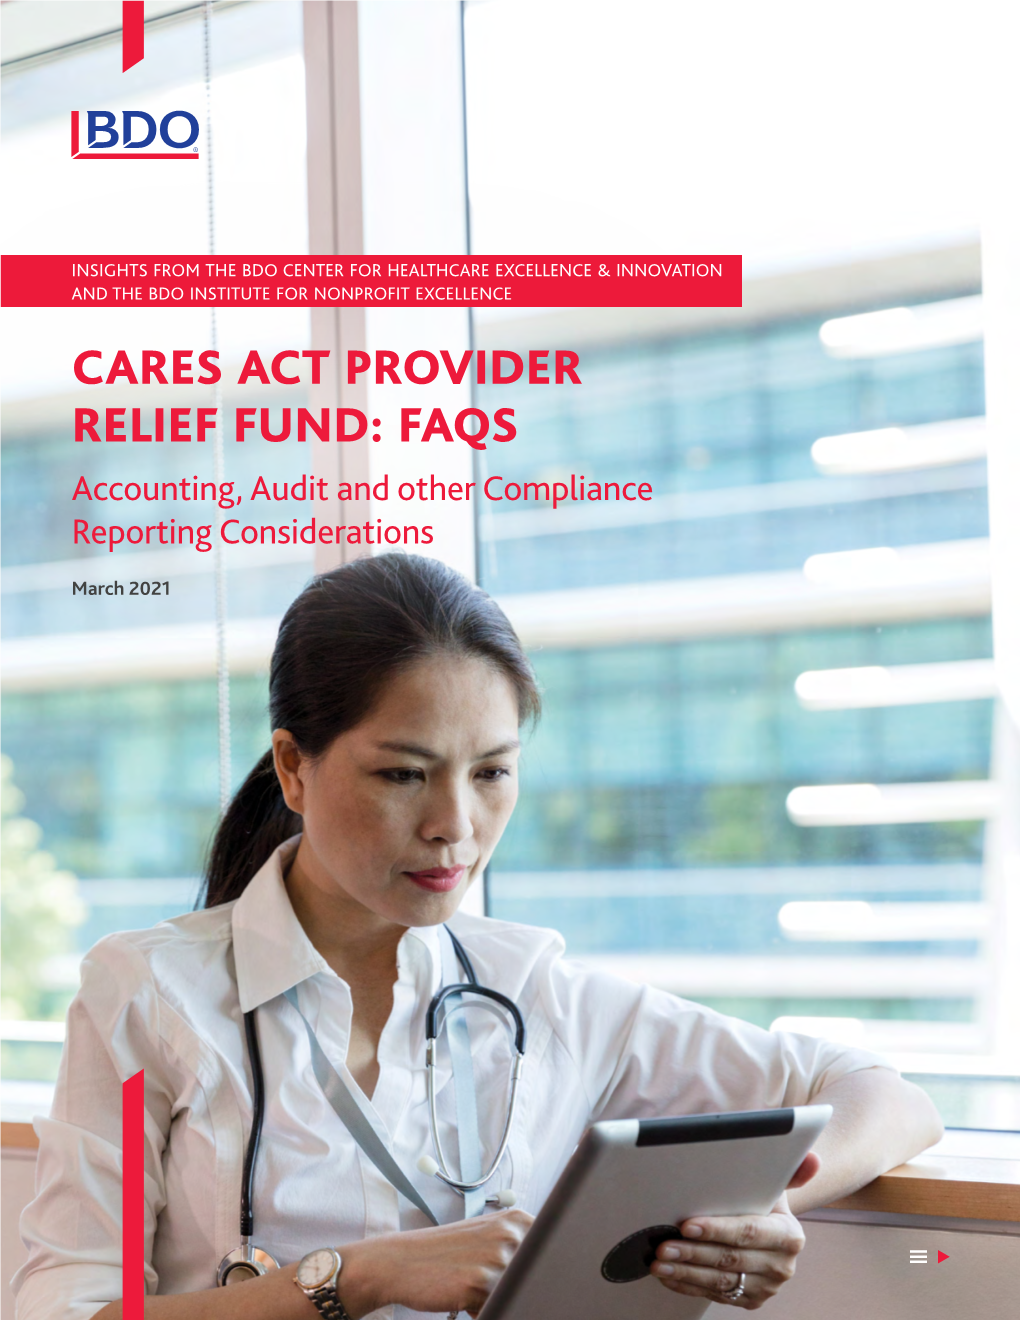 CARES ACT PROVIDER RELIEF FUND: FAQS Accounting, Audit and Other Compliance Reporting Considerations